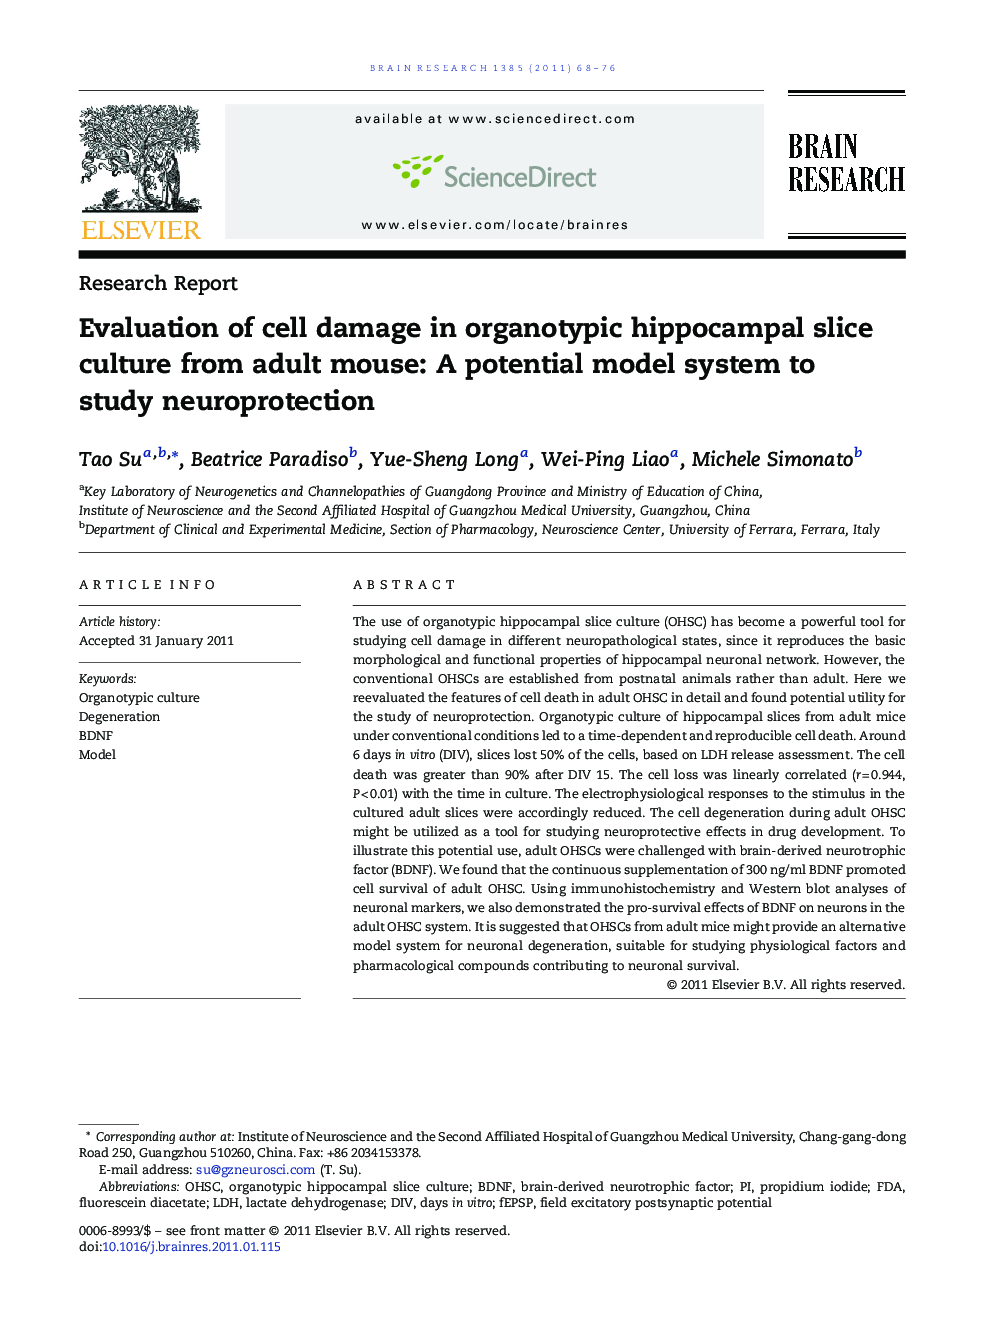 Research ReportEvaluation of cell damage in organotypic hippocampal slice culture from adult mouse: A potential model system to study neuroprotection